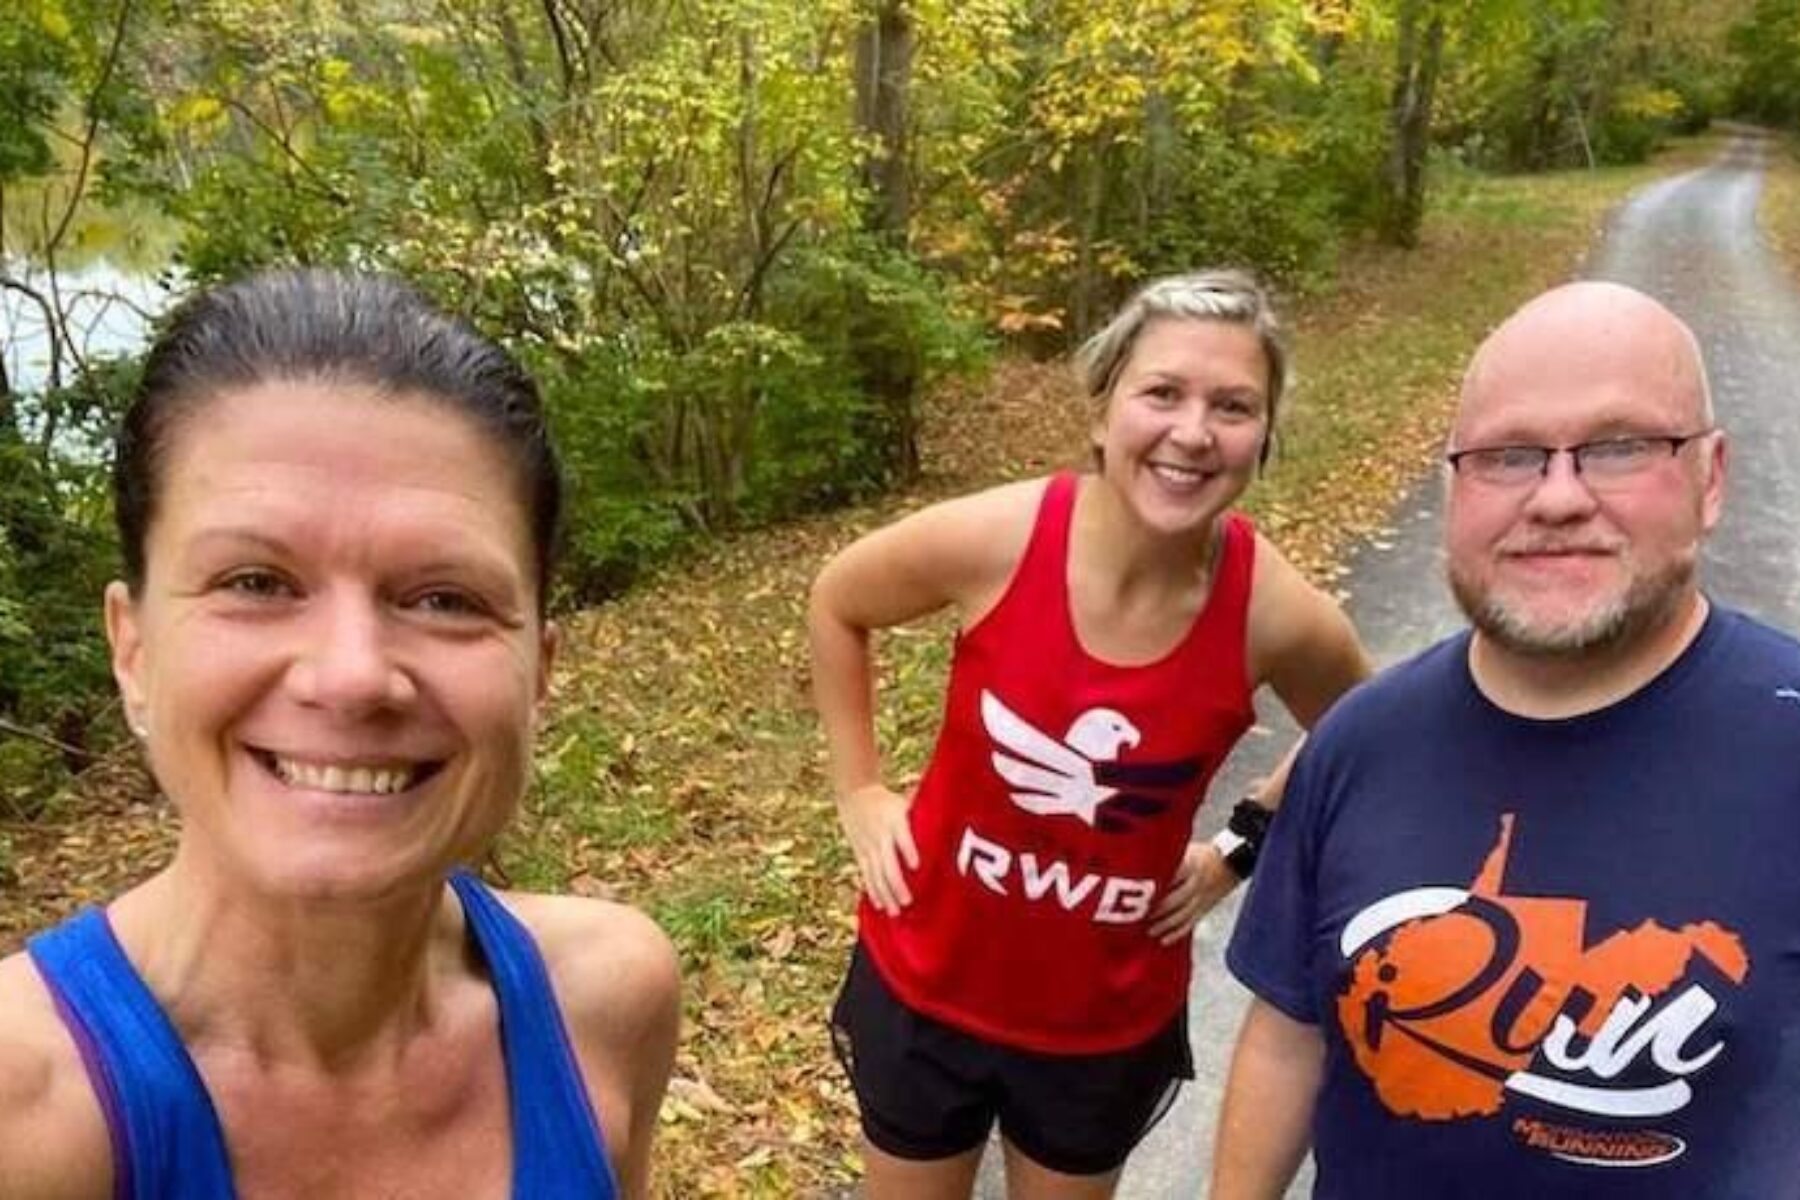 Vincent Viars and his running partners on the Mon River Trail | Courtesy Vincent Viars